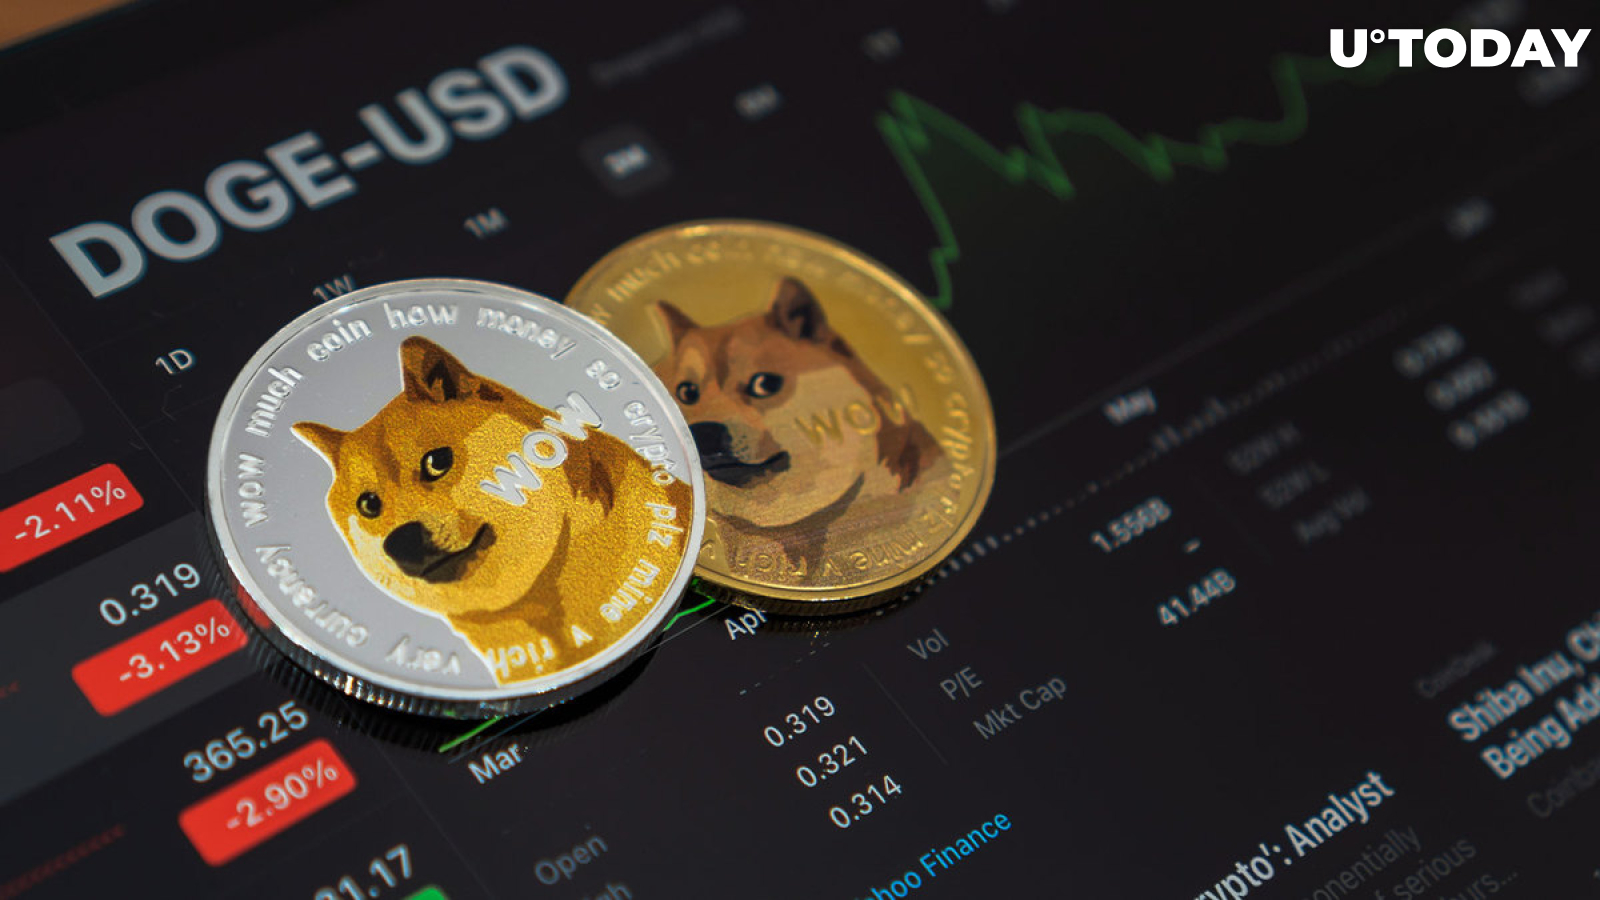 Dogecoin Sees 4 Billion Coins Traded Within 24 Hours, Time for Another Price Move?